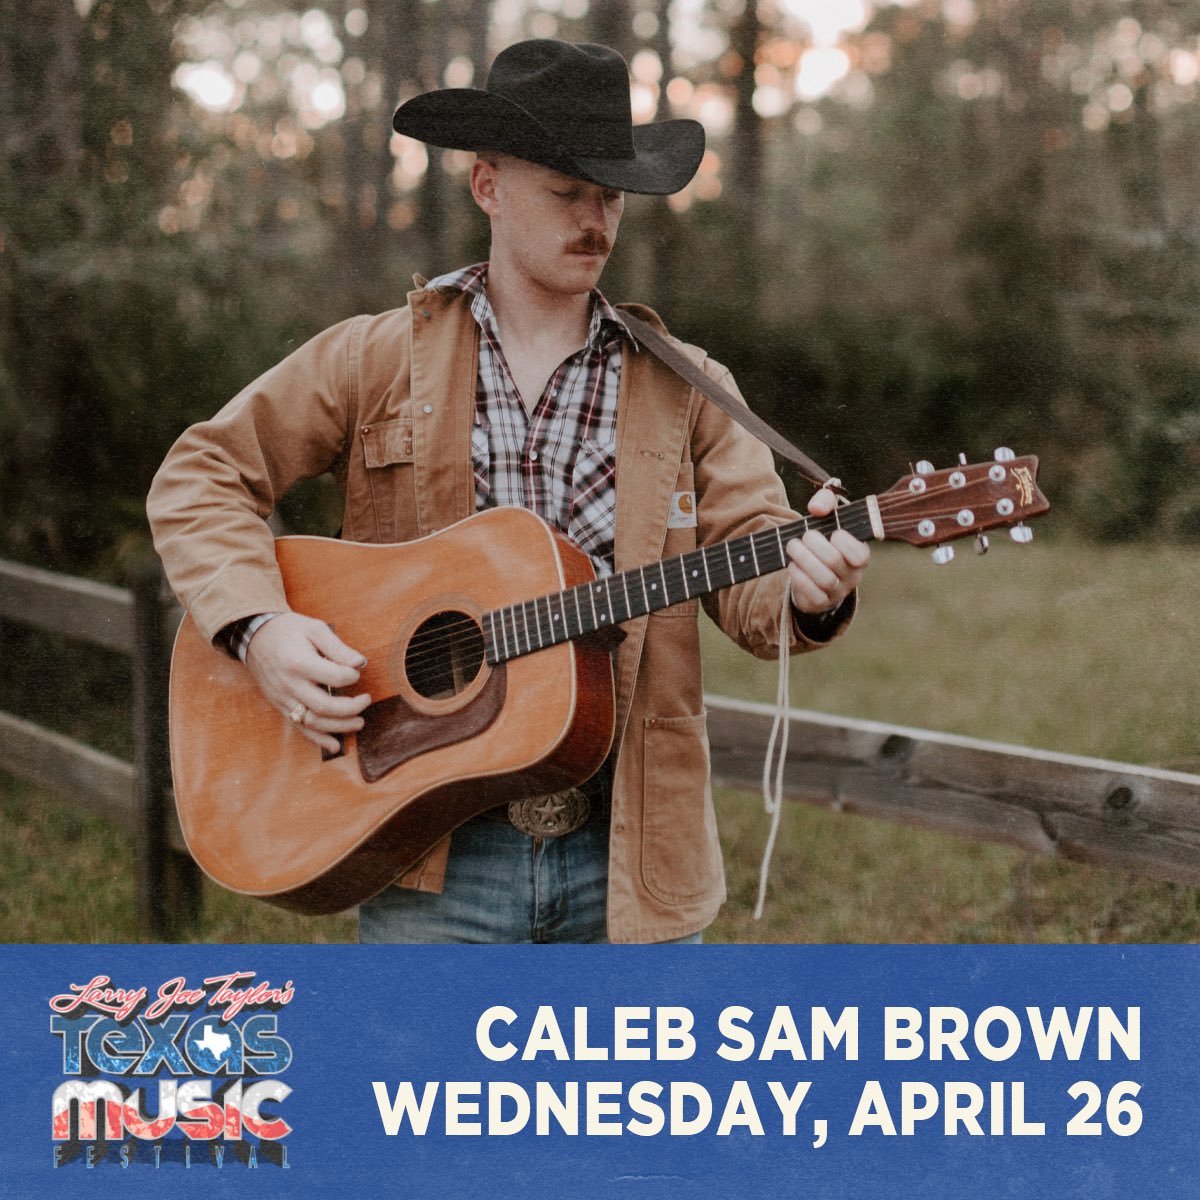 CONGRATS to our 11th Annual LJT Songwriter Showcase finalist, Caleb Sam Brown! 🎶 He will perform Wednesday, 4/26 on the Allsup's Stage at 12:30pm. Also, be sure to tune in to @959theranch TODAY during the 4pm hour with @shayneholl to hear more about Caleb's music! #LJT2023